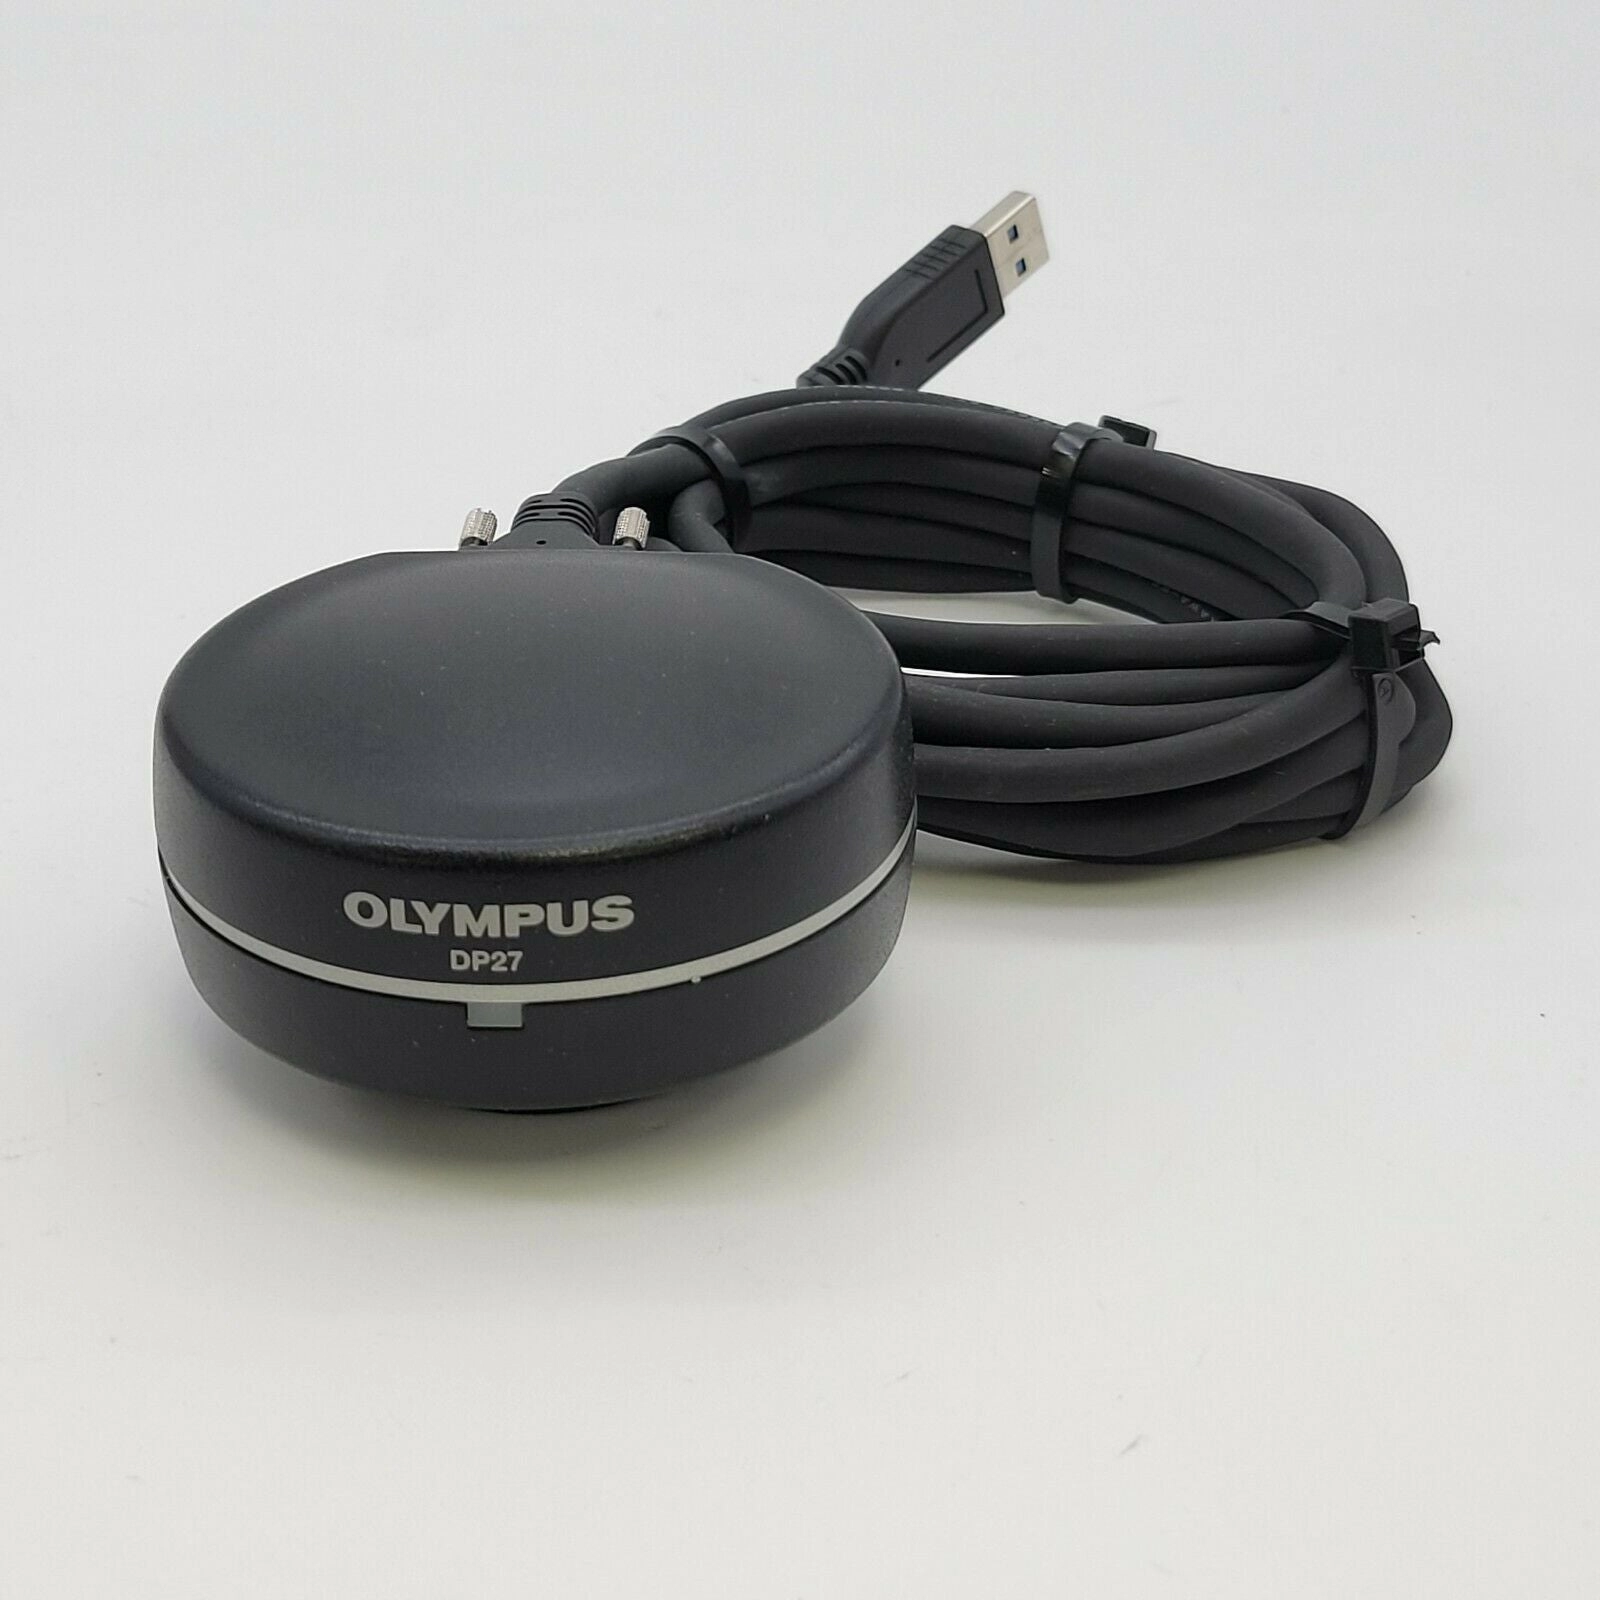 Olympus Microscope Camera DP27 with Cable